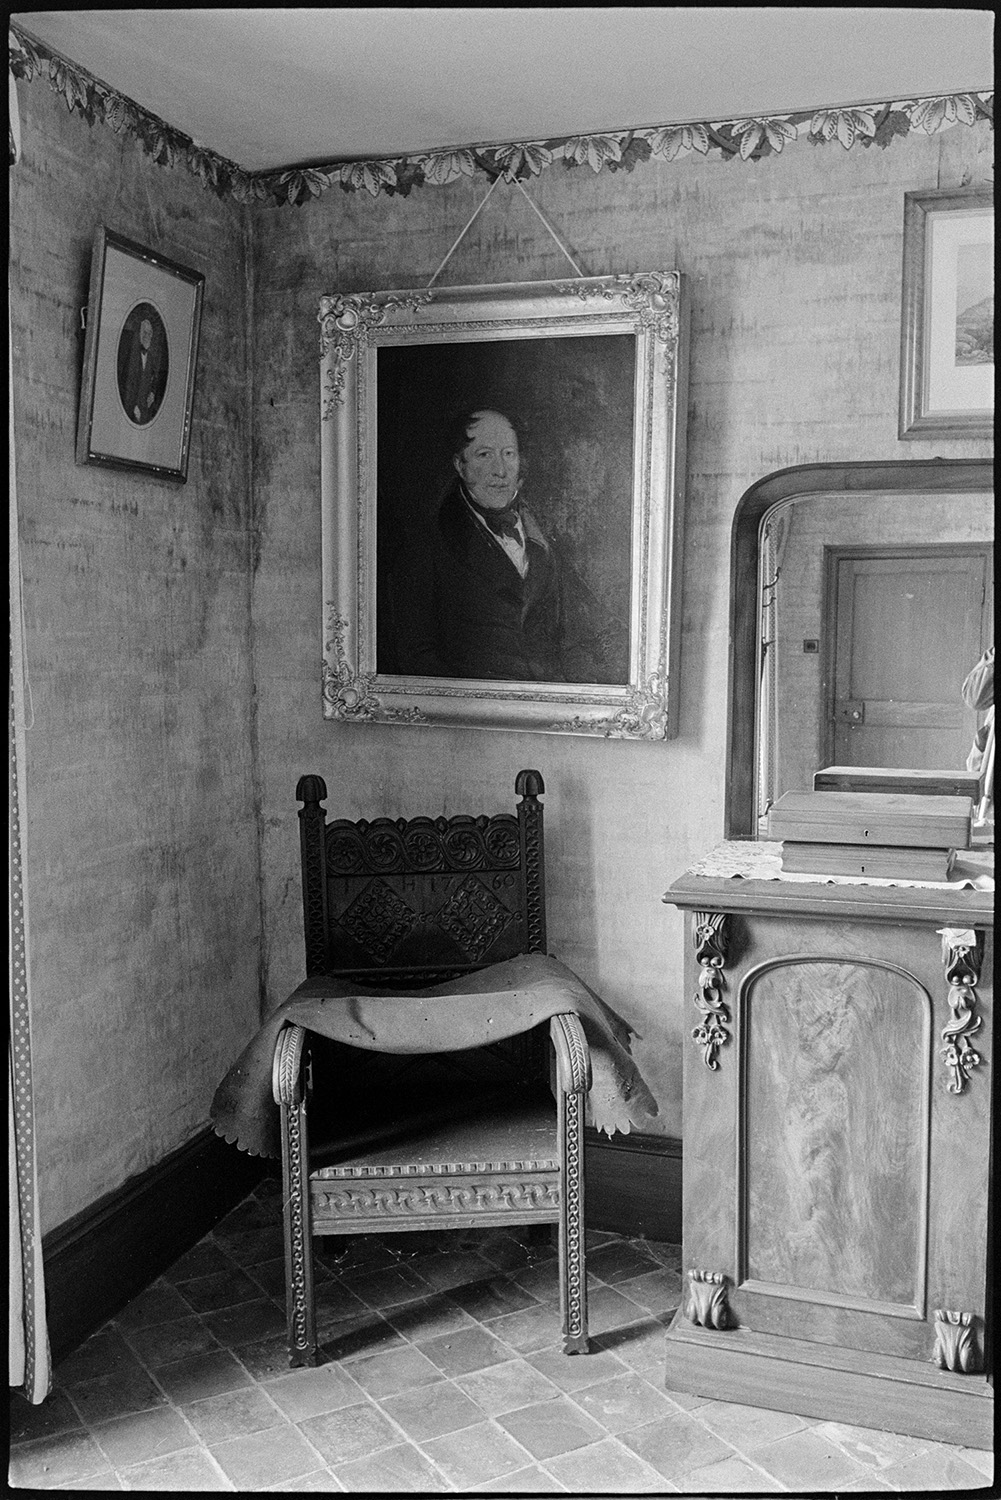 Dining room of large farmhouse. Furniture, table, chairs, mirror on sideboard. 
[A sideboard and carved wooden chair in the dining room at Narracott farm, South Molton. Pictures are also hung on the wall.]